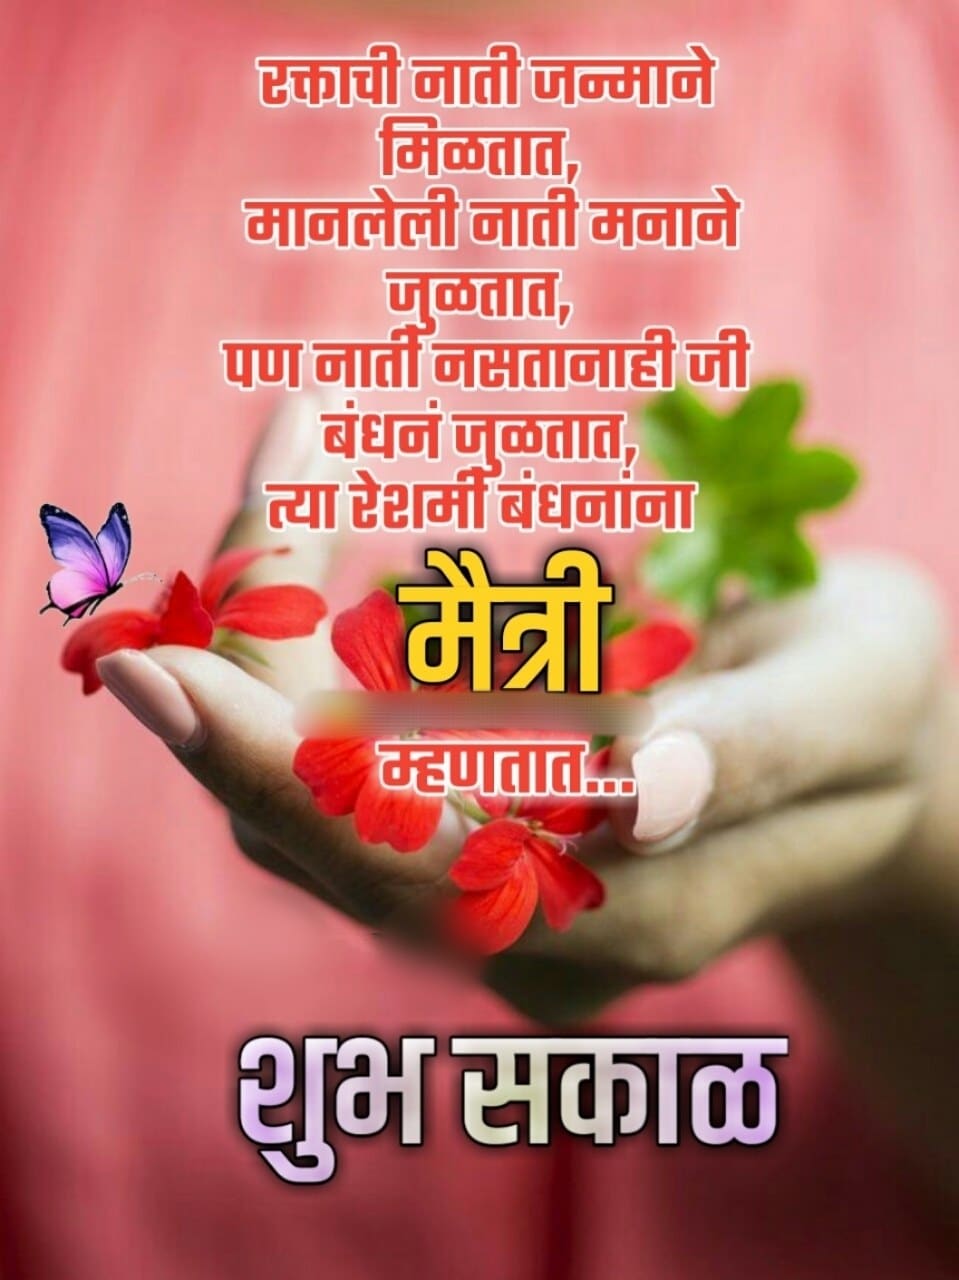 Good Morning Images In Marathi For Friends